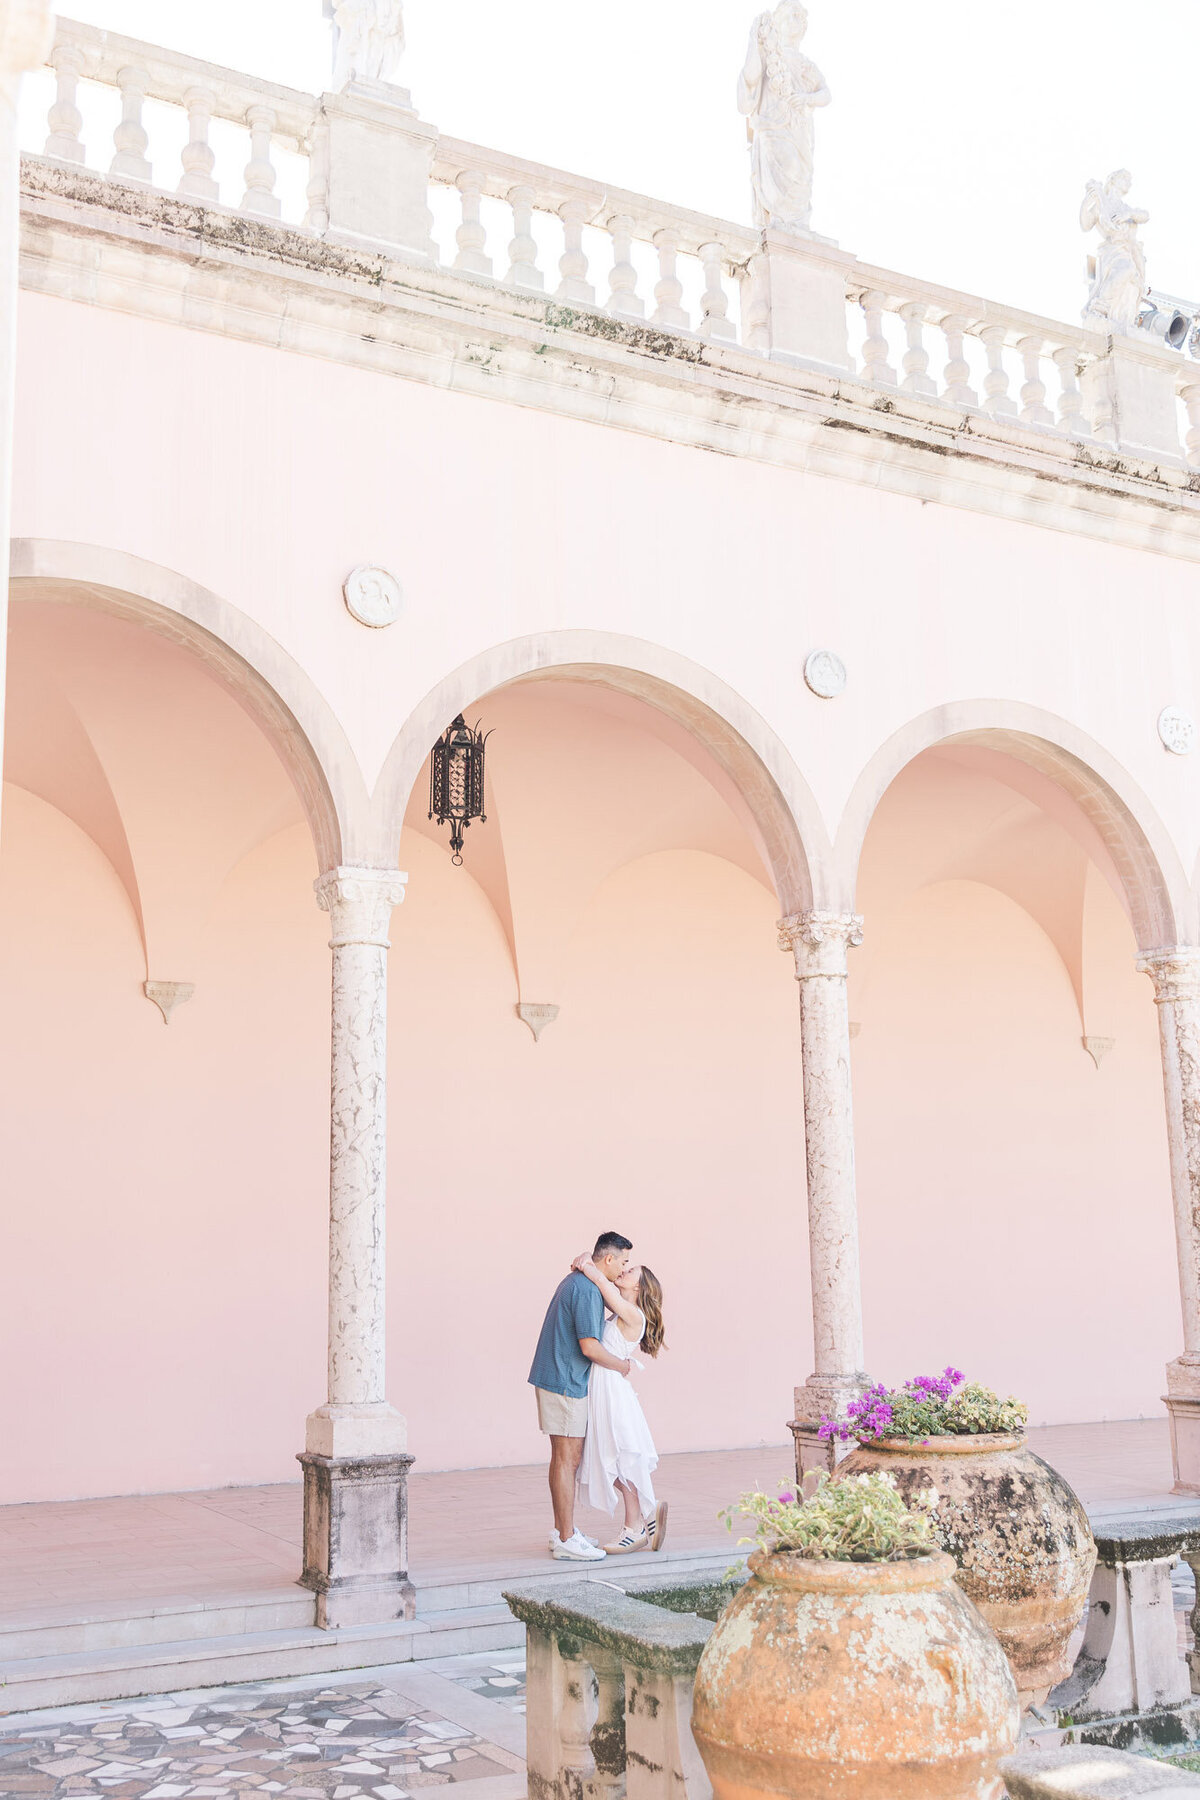 engaged couple kissing under an archway